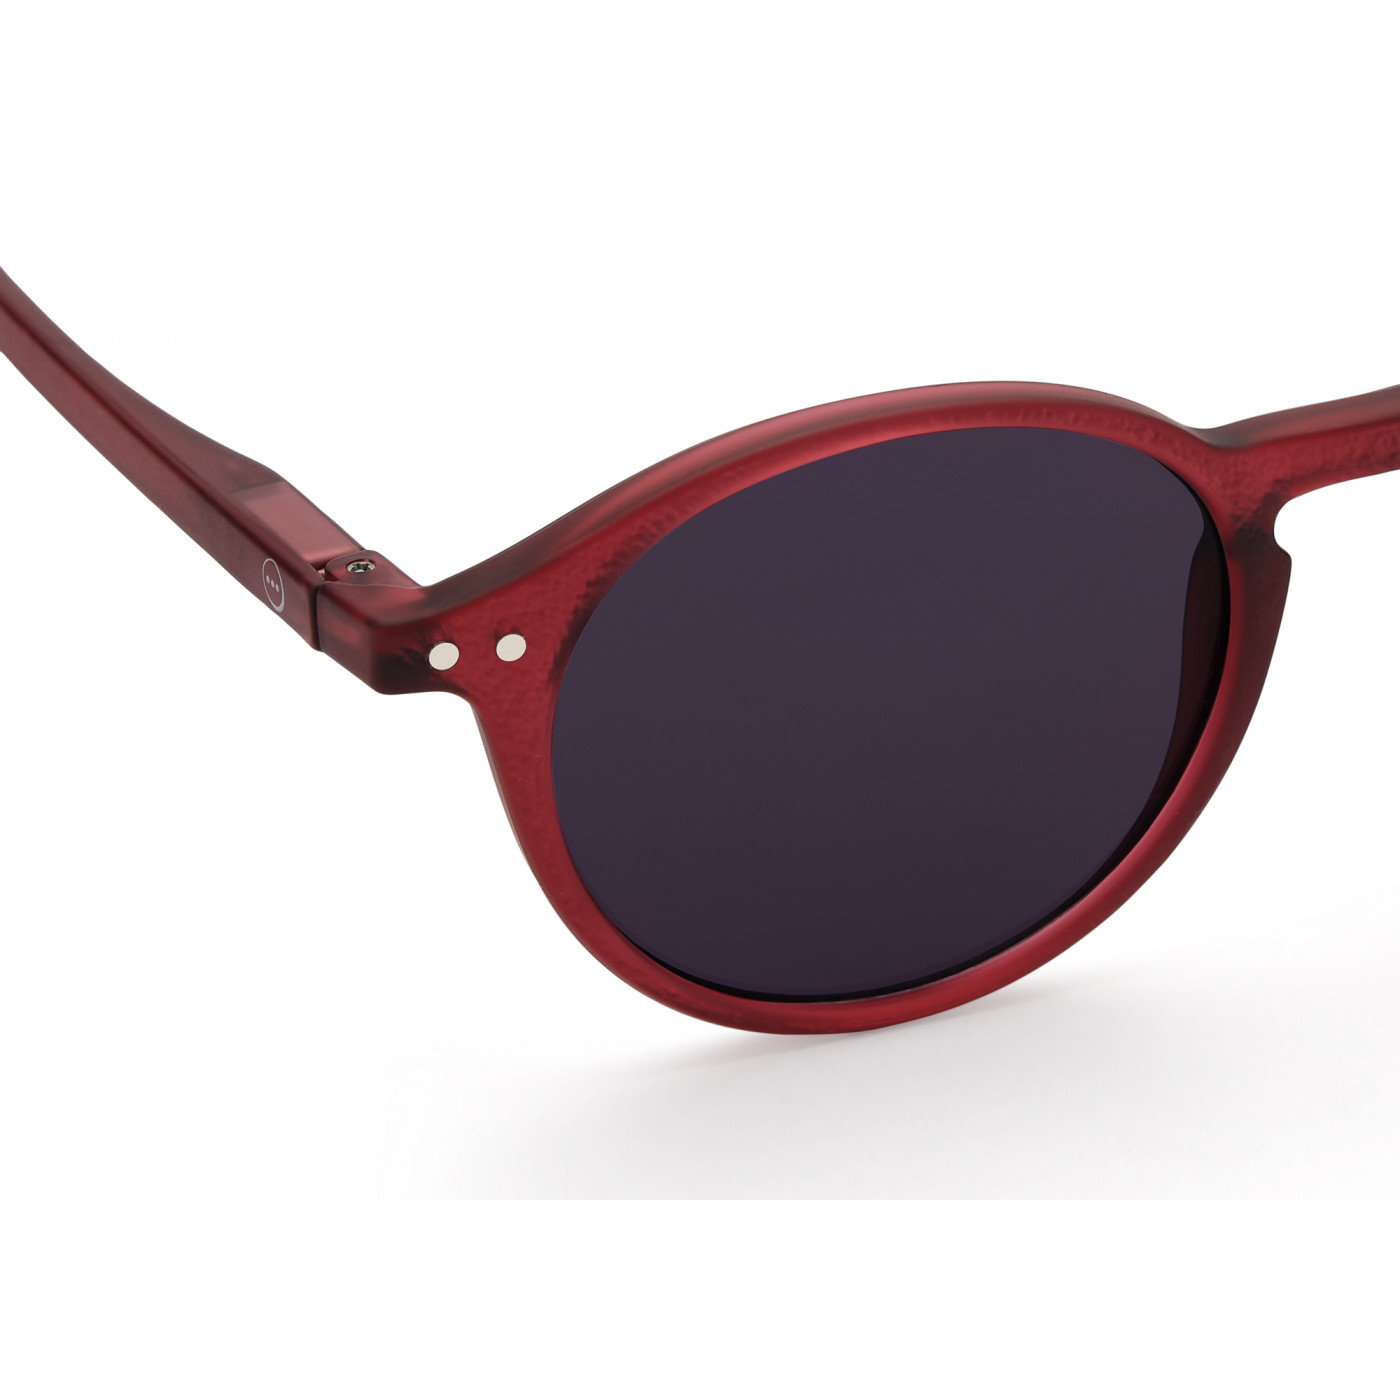 Sunglasses frame D Rosy Red by Izipizi Essentia collection for AW22